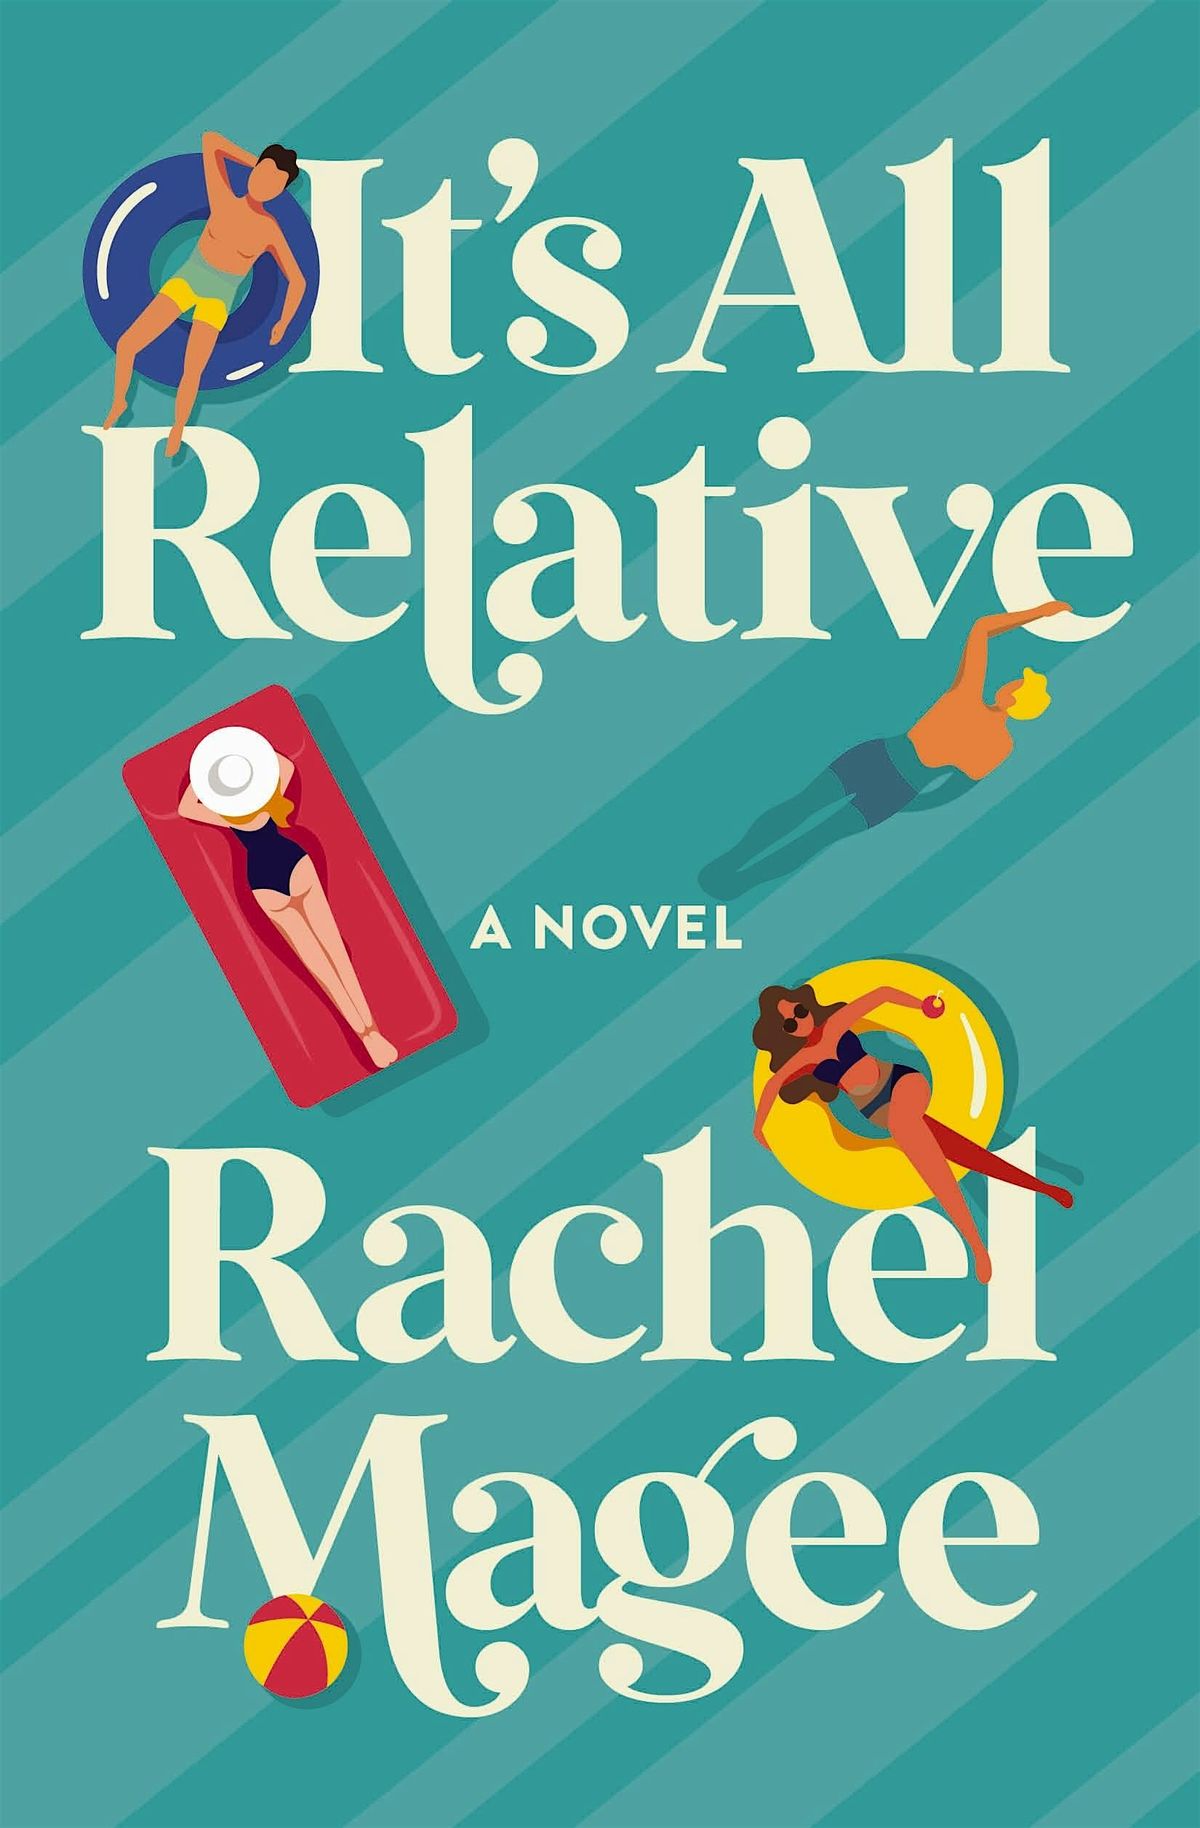 An Afternoon with Rachel Magee